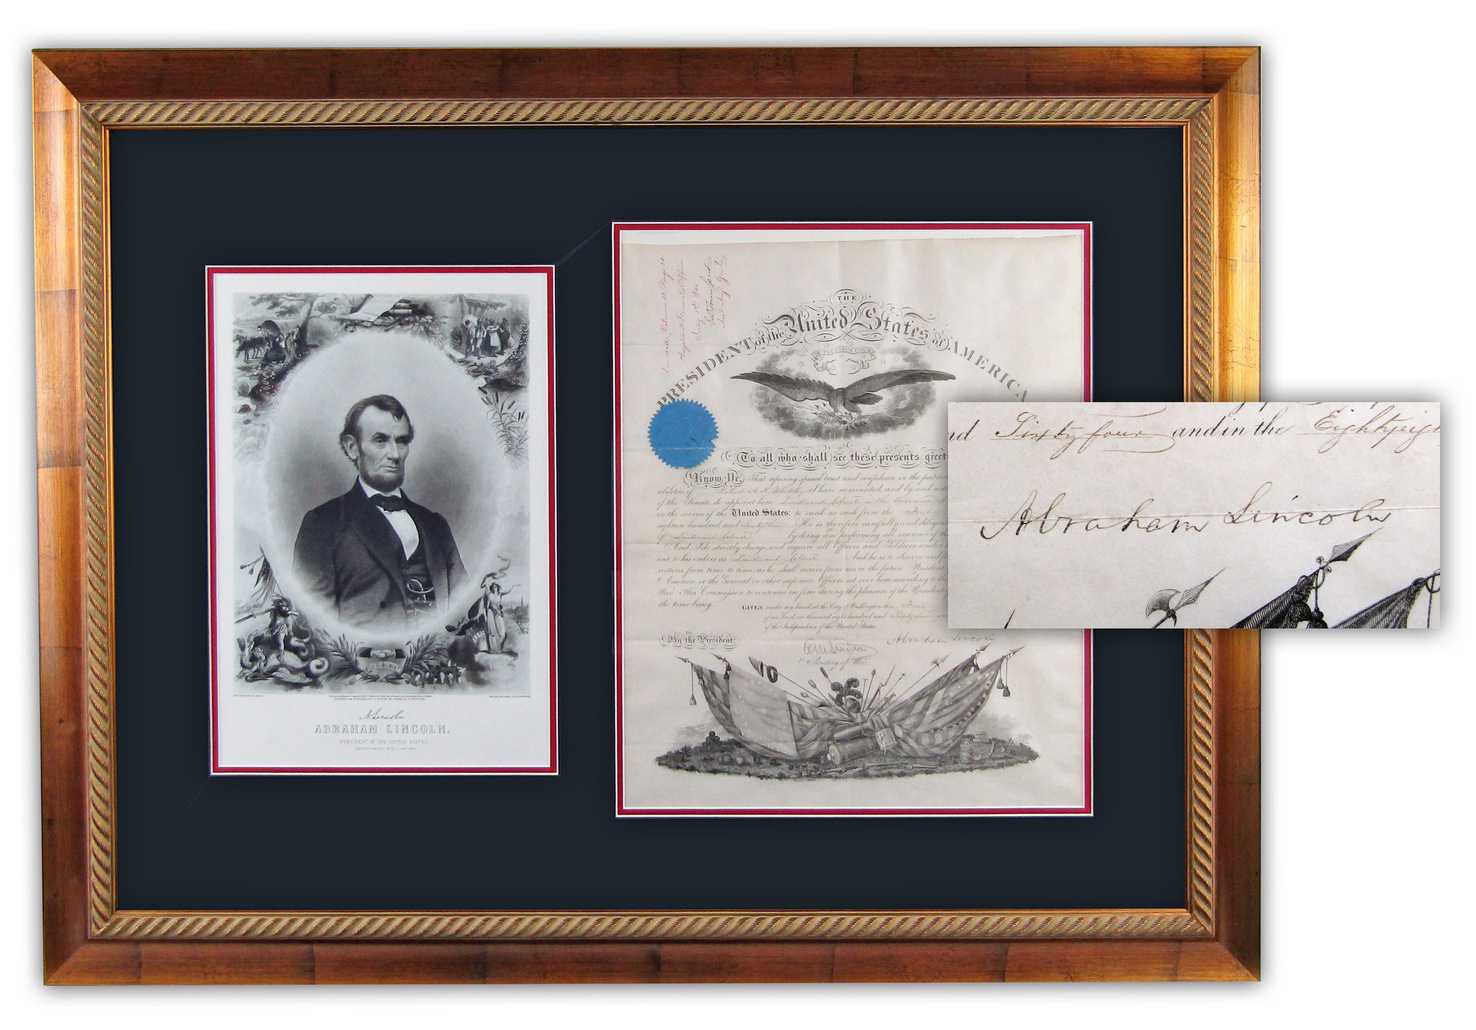 A Civil War-dated military commission signed by Lincoln for Lt. Col. Robert H. K. Whiteley of Maryland, $6,000-$8,000 at University Archives.